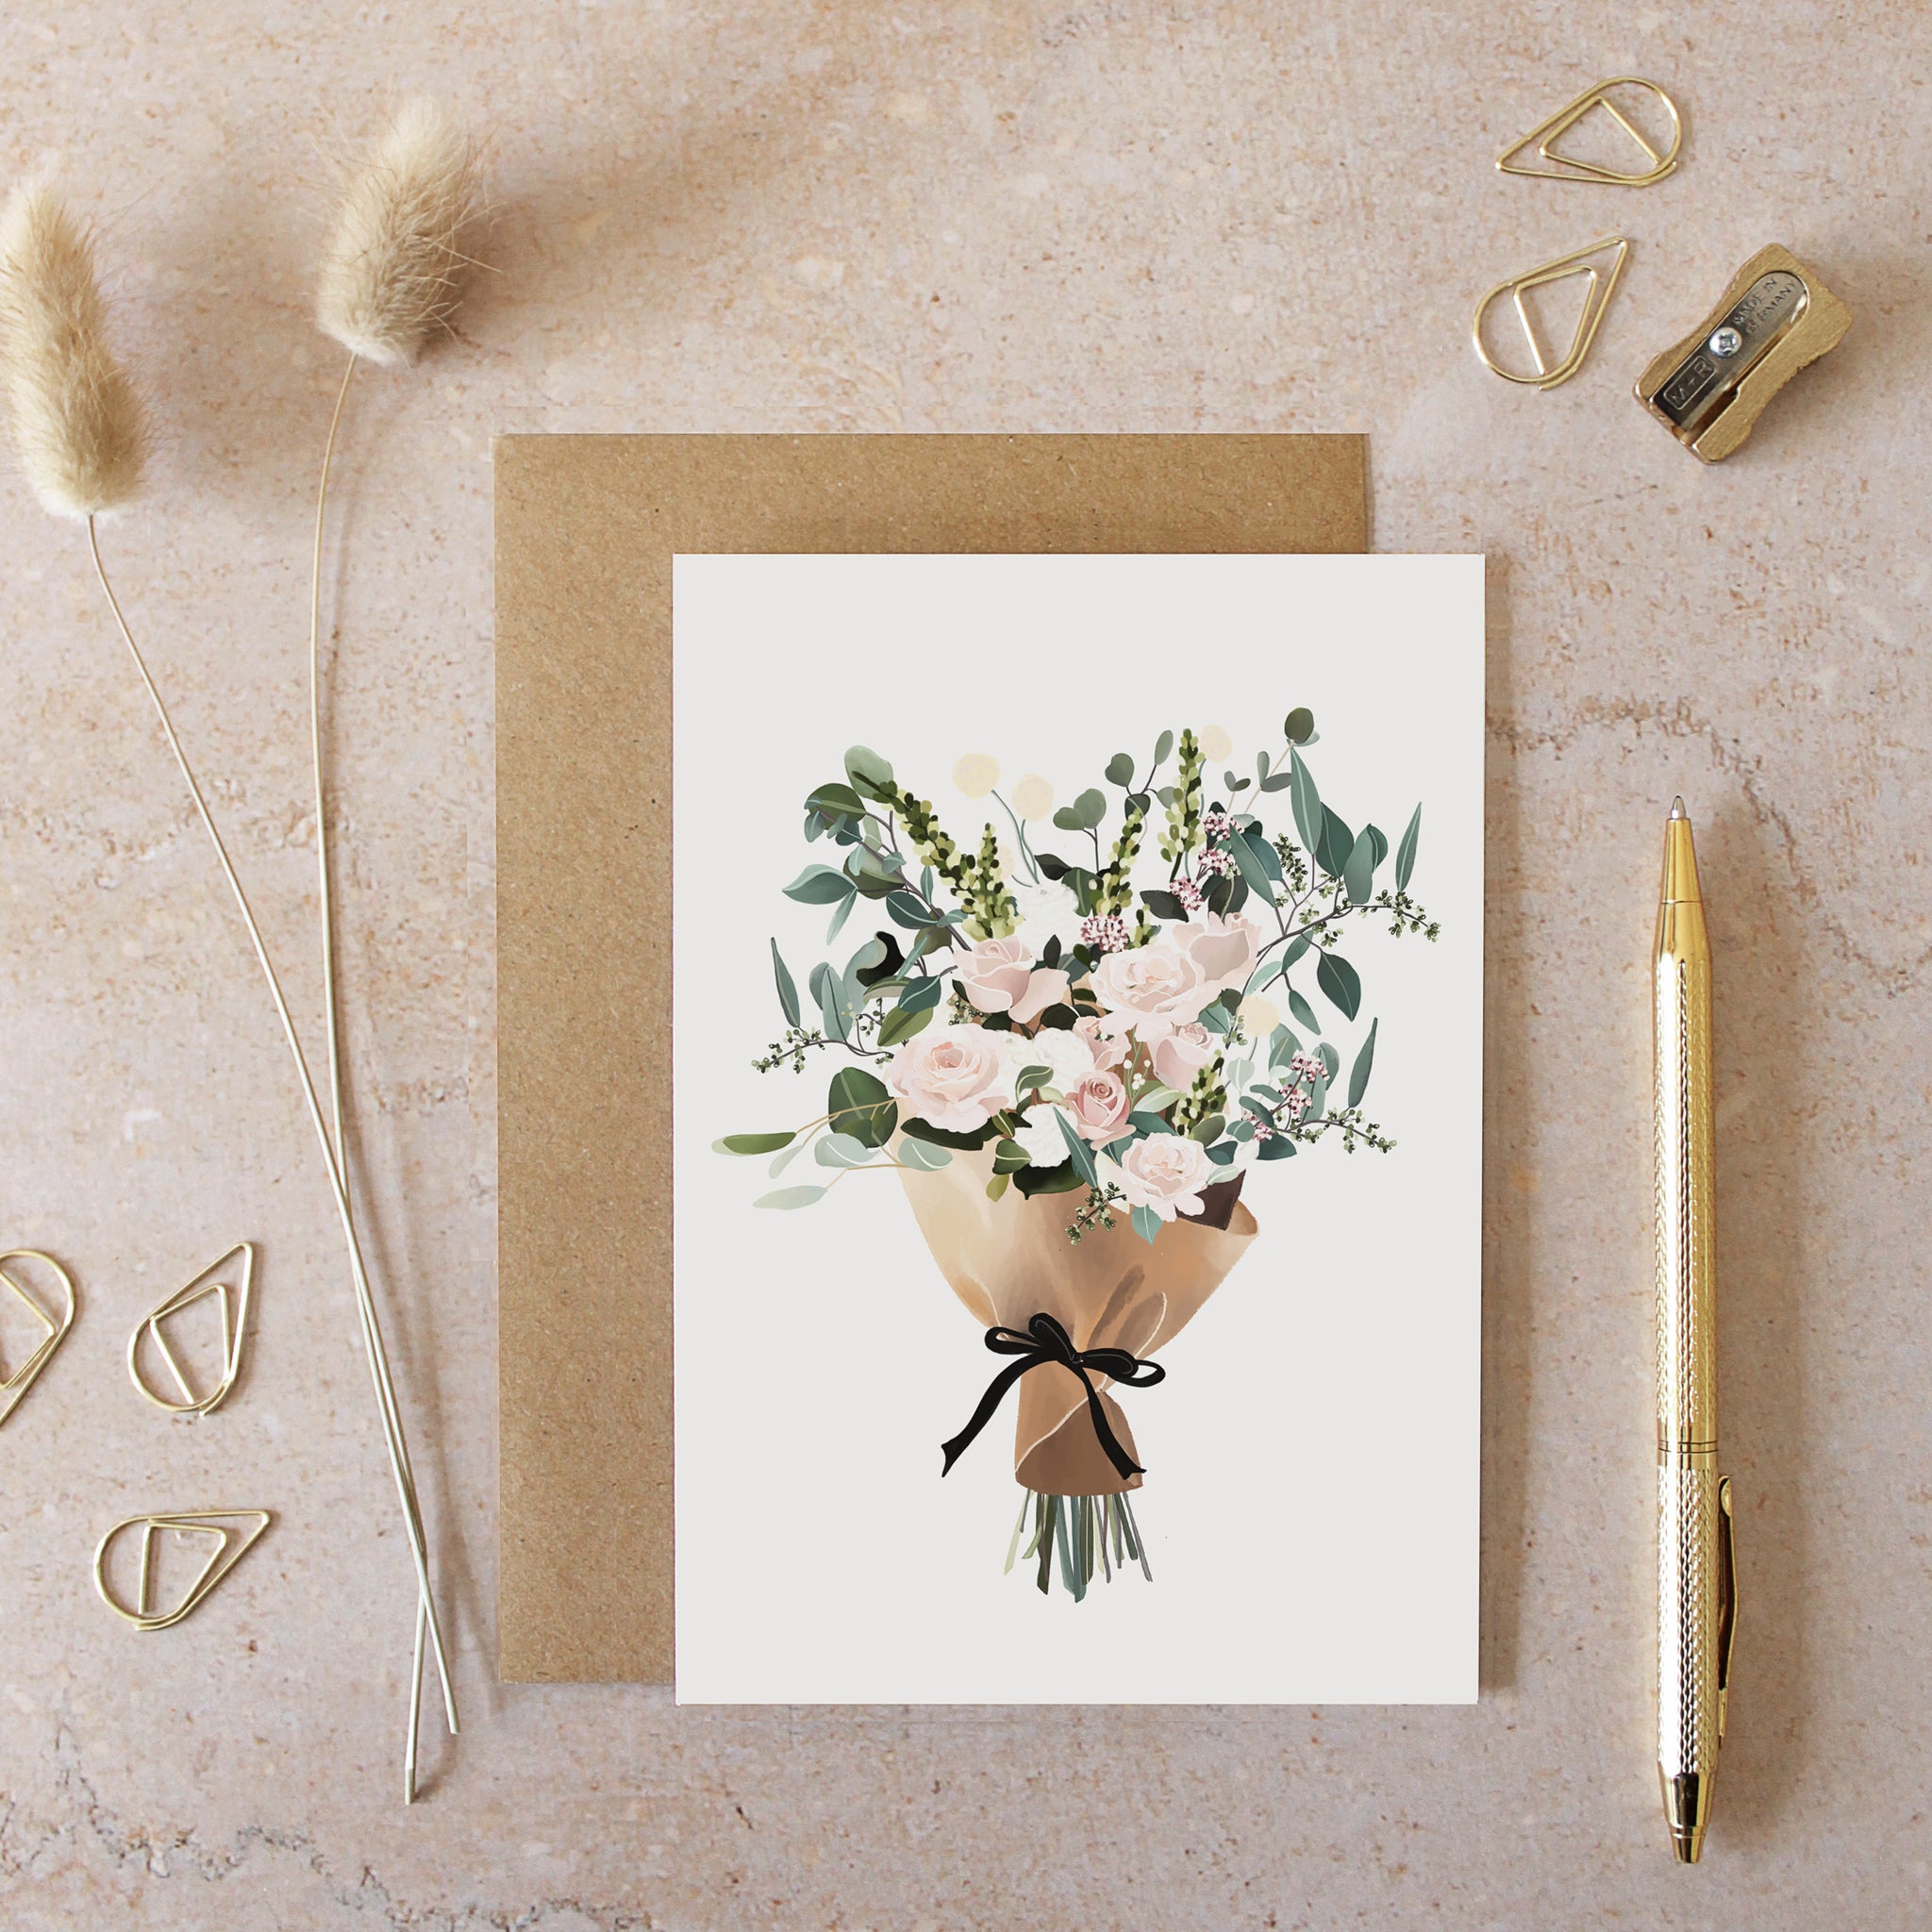 Flower Bouquet Greeting Occasion Card